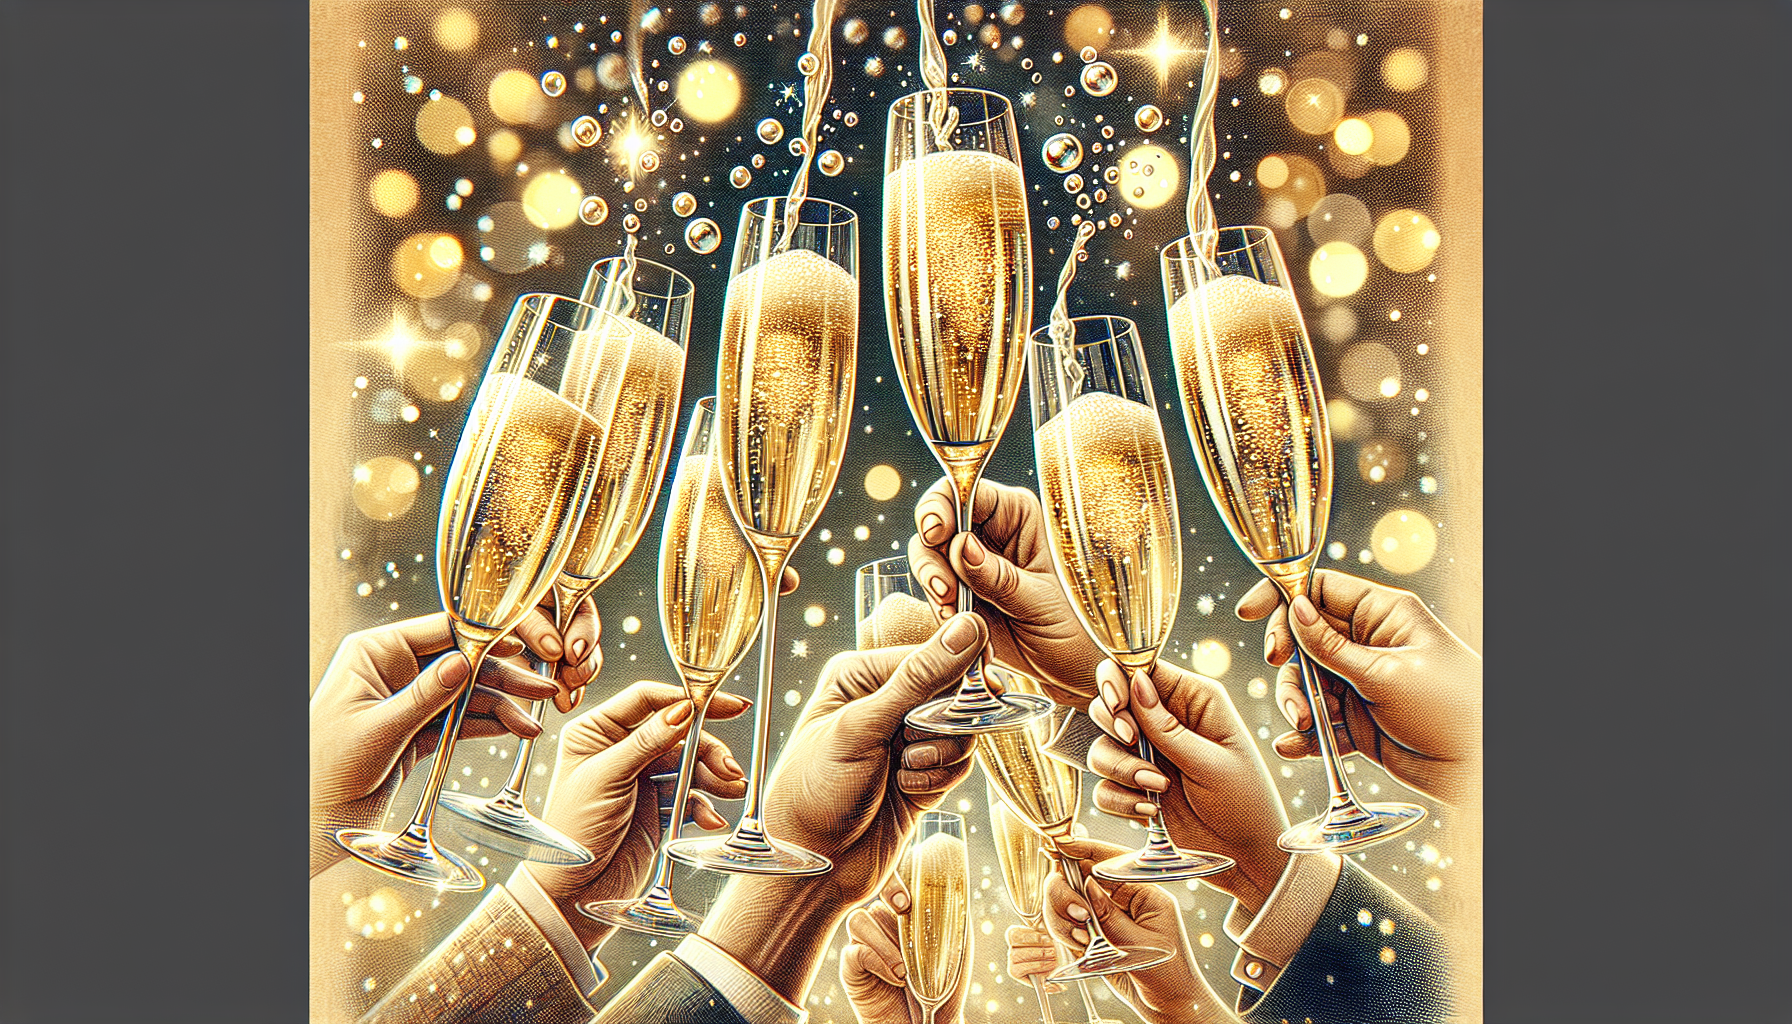 Illustration of celebratory toast with Champagne glasses